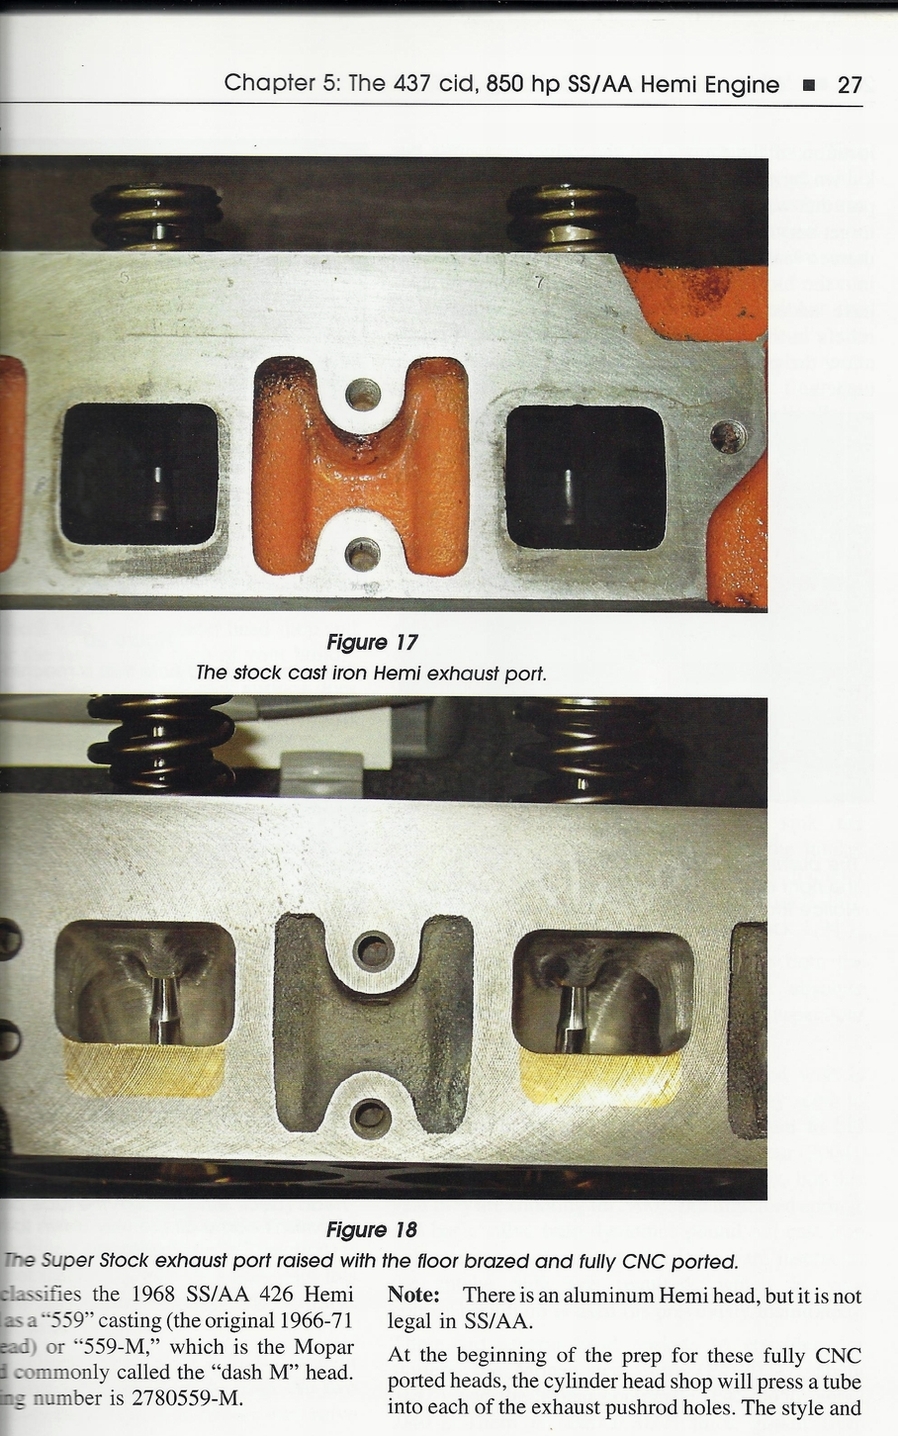 Attached picture 6786903-Copyofportbrazing.jpg